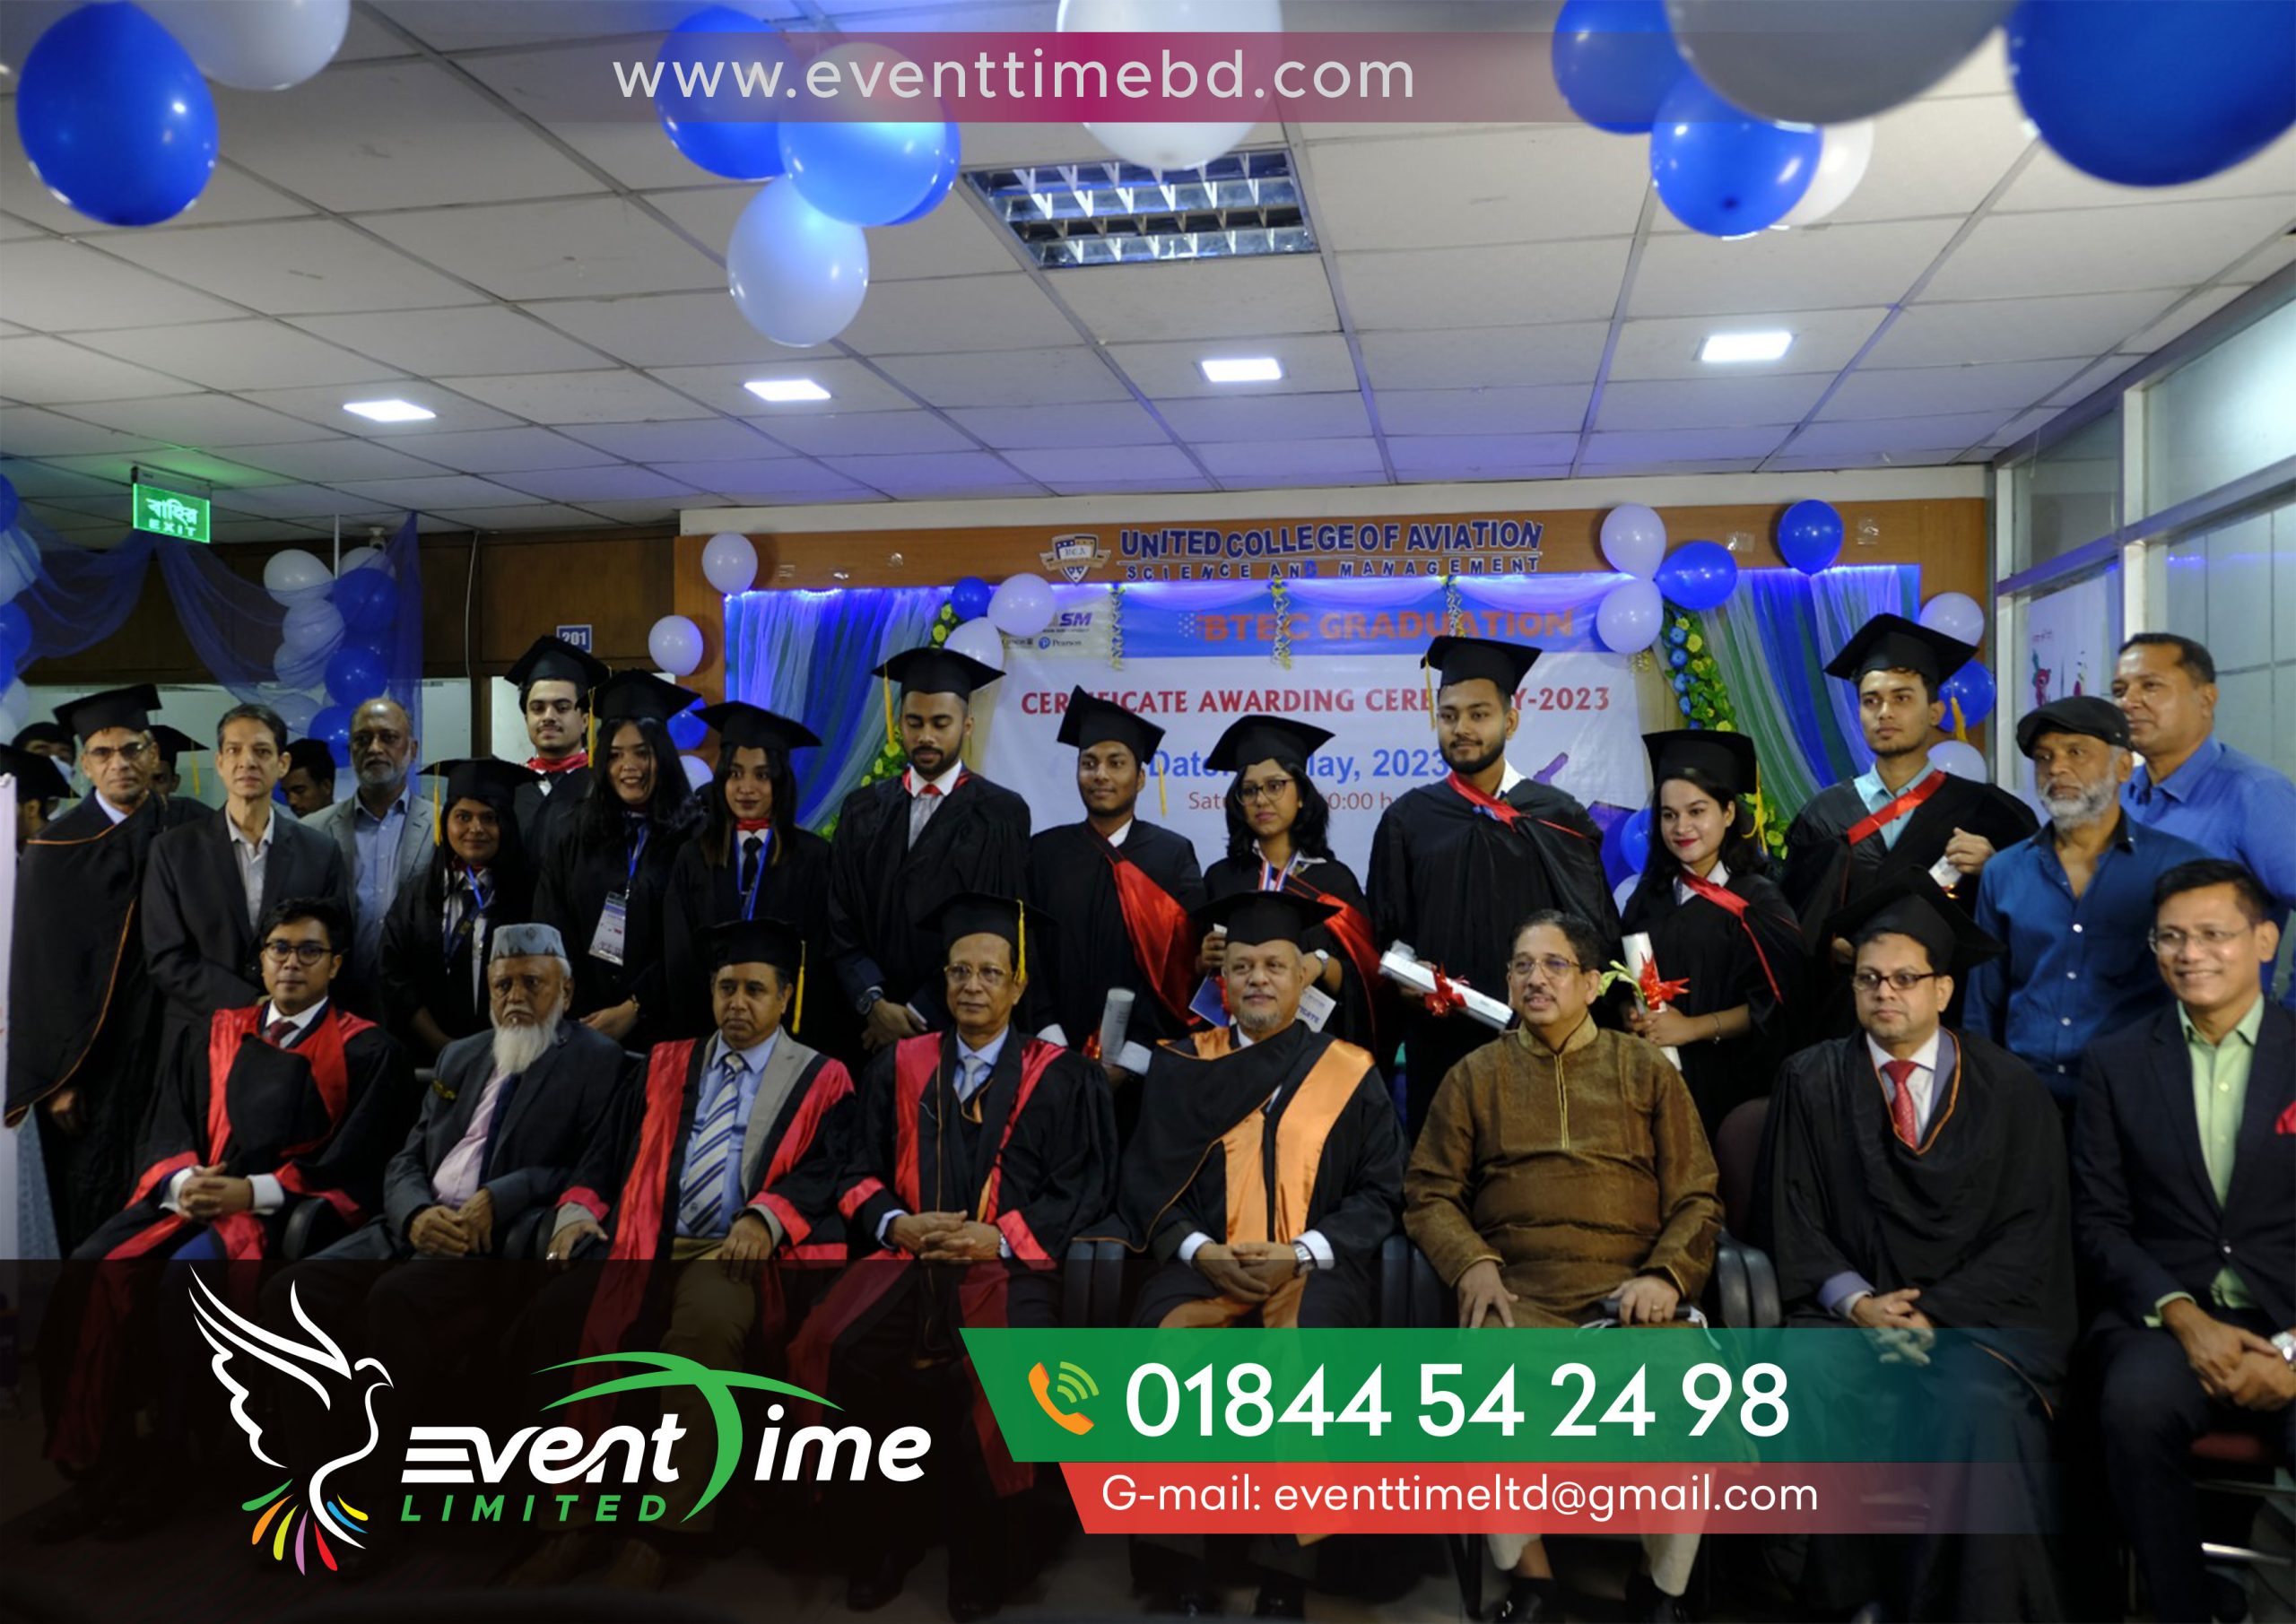 Graduation event. Event company names. Event company. Event company logo. Event company Bangladesh. Event company near me. Event company malaysia. Event company in delhi. Event company in mumbai. Event company profile. Event company in dubai. Are event company. Name for event companies. Which company event. What is event.Which. What is event based. Why event company. Why attend industry events. What caused the event. Purpose of corporate events. Event companies canada. Name for event companies. Event companies for hire. Event company for. Name for event companies. Company event ideas. Company events for employees. How much do event companies make. Event company is. Name for event companies. What makes an event an event. Event vs events. What is an event business. Event companies near me. Event companies near me hiring. Event companies toronto. Event company to. Name for event companies. How much do event companies make. Event industry networking events. What makes an event an event. Event entertainment companies. Event company. Event company names. Event companies near me. Event company singapore. Event companies in dubai. Event companies in mumbai. Event companies in delhi. Event company malaysia. Event company logo. Event company profile. Event company organizational chart. Event company organisation. Event organizer company profile pdf. Event organizer company names. Event organizer company philippines. Event organizer company profile. Event organizer company profile sample. Name for event companies. Event company description. Event company names list. Best event company in india. Best event company in delhi. Best event company names. Best event company. Best event company in mumbai. Best event company in jaipur. Best event company in patna. Best event company in dubai. Best event company in bangalore. Best event company in singapore. Top event companies in canada. Best event management companies in canada. How to run an events company. Company event ideas. Best event company in india. Best event company in delhi. Best event company in jaipur. Best event company in patna. Best event company in mumbai. Best event company in dubai. Best event company in udaipur. Best event company in the world. Best event company in ahmedabad. Best event company in lucknow. Best event company in india. Best event company in delhi. Best event company in jaipur. Best event company in patna. Best event company in mumbai. Best event company in dubai. Best event company in udaipur. Best event company in the world. Best event company in ahmedabad. Best event company in lucknow. Best event company near me. Best event management near me. Best event management company near me. Best party rental company near me. Corporate event companies near me. Corporate event ideas near me. Corporate events near me. Large event planning companies. Best event management tools. Best event company in india. Best event company in delhi. Best event company in jaipur. Best event company in patna. Best event company in mumbai. Best event company in dubai. Best event company in udaipur. Best event company in the world. Best event company in ahmedabad. Best event company in india. Best event company in delhi. Best event company in jaipur. Best event company in patna. Best event company in mumbai. Best event company in dubai. Best event company in udaipur. Best event company in the world. Best event company in ahmedabad. Best event company in lucknow. Best event company in india. Best event company names. Best event company in delhi. Best event company. Best event company in jaipur. Best event company in patna. Best event company in mumbai. Best event company in dubai. Best event company in udaipur. Best event company in ahmedabad. Best event organizer company. Best corporate event organisers in chennai. Best corporate event organizers. Top event organizing company. Best corporate event organizers in chennai. Best corporate event organisers in mumbai. Best corporate event organisers. Best event management in odisha. Name suggestions for an event company. World best event management company. Event agency. Event agency jobs. Event agency dubai. Event agency near me. Event agency jobs london. Event agency malaysia. Event agency singapore. Event agency in mumbai. Event agency sydney. Event agency toronto. Are event planner. Are event company. What is an event agency. Can event planning be a side job. Can event planning be a career. What is an event agency. How to get into the event planning industry. What's event management. What event management do. What's event planning. What is event agency. What caused the event. What is an events company. What are agency problems and how do they come about. Which. Which company event. First agency events. Who event management system. Who event planning. What is an event agency. Why hire an event management company. Who sponsors events. Who owns main event entertainment. Who were involved in the event. Why event management is important. Why event management. Why event management interview questions. Why event planning. Why event management as a career. Why event planner. Why event management course. Why event management system. Why event management companies. Why event company. Event agency cannes. Event management canada. Event planner canada. Event planner cancellation policy. Event management canberra. Event planner canberra. Event planning canvas. Event planning canada. Event planner canada salary. Event planner cancun. Event agency forum. Event planner for birthday party. Event management for birthday party. Event planning form. Event management for marriage. Event planner for baby shower. Event planning for wedding. Event planner for birthday. Event planning for birthday. Event planning for companies. Event management is considered one of the strategic. Event management is good career. Event management is. Event management is in which industry. Event planner is. Event planning is. Event company is. Event management is important. What is an event agency. Event agency near me. Event planner near me. Event management near me. Event planning near me. Entertainment agency near me. Event planner near me jobs. Event planner near. Event planner near me indian. Event management near vijayawada. Event management near ramamurthy nagar. Event agency toronto. Event agency tokyo. Event management tools. Event planner toronto. Event management tourism. Event management top companies. Event planning toronto jobs. Event planner toronto salary. Event planning to. Event management to. Event management with salesforce. Event planner with. Event planning with. Event management with meaning. Event planning with meaning. Event management with course. Event agency in dubai. Event agency in london. Event in agency. Event agency jobs. Event management without degree. Event planner without degree. Event planning without degree. No event information. Event agency. Event agency jobs. Event agency dubai. Event agency london. Event agency staff. Event agency staffing. Event agency recruitment. Event management. Event planner. Event management course. Event management organizational chart. Event organizer company. Event organizer company profile pdf. Event organizer company profile. What is an event agency. Event planner vs coordinator. Event planner vs project manager. Event management vs interior design. Event planning vs coordination. Event planner vs manager. Event planning vs marketing. Event management vs monitoring. Event management vs marketing. Event planner vs promoter. Event planning vs. Commencement. Convocation ceremonies. Graduation ceremony. Convocation photoshoot. Graduation days. Graduation party. Convocation day. Commencement day. Graduation convocation. Jk graduation. Commencement ceremony. Graduation ceremony 2022. Graduation open house. Graduation event. Graduation party invitations. Moving up ceremony. Preschool graduation. Baccalaureate service. Pre k graduation. Grad party. Lavender graduation. Graduation ceremony invitation. Graduation dinner. Degree convocation. Graduation day 2022. Graduation stage decoration. Nursery graduation. Baccalaureate graduation. Graduation kindergarten. Masters in event management. Graduation open house invitations. Grad party invitations. Graduation dinner invitation. University commencement. 2022 commencement. Graduation celebration invitation. Grad day. Graduation reception. Graduation party theme. Virtual graduation ceremony. Senior party. Graduation invitation examples. Phd convocation. Graduation day invitation. University graduation ceremony. Graduation day decoration. Graduation day celebration. December graduation. Graduation week. Convocation invitation. Commencement graduation. Graduation sunday. Vpk graduation. Commencement ceremony 2022. Graduation catering. Phd graduation ceremony. Undergraduate commencement. Graduation banquet. Graduation day ceremony. The graduation ceremony. Graduation party at home. Graduation parade. Graduation commencement ceremony. Graduation lunch. Grad dinner. Phd party. Graduation party invitations online. Graduation and convocation. Attend graduation ceremony. 2022 graduation ceremony. Graduation gala. Graduation party announcement. Invitation for convocation ceremony. Event management mba. Kindergarten graduation day. Kg graduation day. Graduation after party. Graduation day 2023. Friends graduation party. Masters graduation ceremony. Mba graduation ceremony. Graduation day date. On your graduation day. Ca graduation ceremony. Graduation day stage decoration. Convocation stage decoration. Convocation party. Hood ceremony. Graduation december 2022. Kindergarten celebration. Nursing convocation. Student speaker at graduation. Postgraduate graduation ceremony. Kindergarten convocation. A graduation ceremony. Pre kindergarten graduation. Hood convocation. Birthday and graduation party together. Graduation picnic. Graduation day 2021. Graduation tent. December 2022 graduation. Church graduation ceremony. Graduation dinner party. Convocation and graduation. Graduation ceremony today. Graduation day photoshoot. Graduation ceremony 2023. All night grad party. Diploma in event management after graduation. Indoor graduation photoshoot. Day of graduation. Graduation convocation ceremony. Decorating for graduation party. Graduation ceremony announcement. Graduation and birthday party. Graduation birthday party. 2022 graduation party. Graduation tea party. Invitation of graduation ceremony. Master open day. Commencement service. Master degree convocation. Graduation party invitations 2023. Photoshoot convocation. Graduation party game. Virtual commencement. Commencement ceremony invitation. My graduation party. Stage decoration for convocation. University graduation party. Commencement celebration. Balloon decoration for graduation. Graduation ceremony decoration. Donut graduation party. Guest speaker at graduation. Event management masters degree. Graduation 2023 date. Commencement party. Degree party. Graduation breakfast. University graduation day. Graduation invitations 2022. Graduation party invitations 2022. Catering for graduation party. Graduation 2022 date. Graduation brunch. Luau graduation party. Graduation pool party. Backyard graduation party. Taco graduation party. Fiesta graduation party. Graduation party 2022. Outdoor graduation party. Grad party catering. Phd day 2022. Free graduation party invitations. Graduation brunch invitations. Kindy graduation. Graduation and birthday party invitation. Graduation party on a budget. Cheap graduation party invitations. Commencement website. Phd open days. Commencement ball. Graduation reception invitation. Formal invitation graduation. Graduation party agenda. Reception graduation. Graduation cookout invitations. Grad party theme. Surprise graduation party invitations. University commencement ceremony. Graduation week 2022. Kindergarten ceremony. Grad commencement. Make your own graduation party invitations. Hosting a graduation party. Mba in event management fees. Top universities for masters in event management. Same day graduation invitations. Graduation commencement invitations. Graduation day theme. Graduation lunch invitation. Grad convocation. Graduation online invitations. Customized graduation party invitations. Graduation car parade. Hawaiian themed graduation party. Graduation garden party. Nursing pinning ceremony invitations. Commencement hood. Bbq graduation party. Adult graduation party. Pizza graduation party. Graduation scavenger hunt. A graduation party. Graduation day events. Event management master degree. Graduation announcement no party. Pre k graduation party. Baseball themed graduation party.